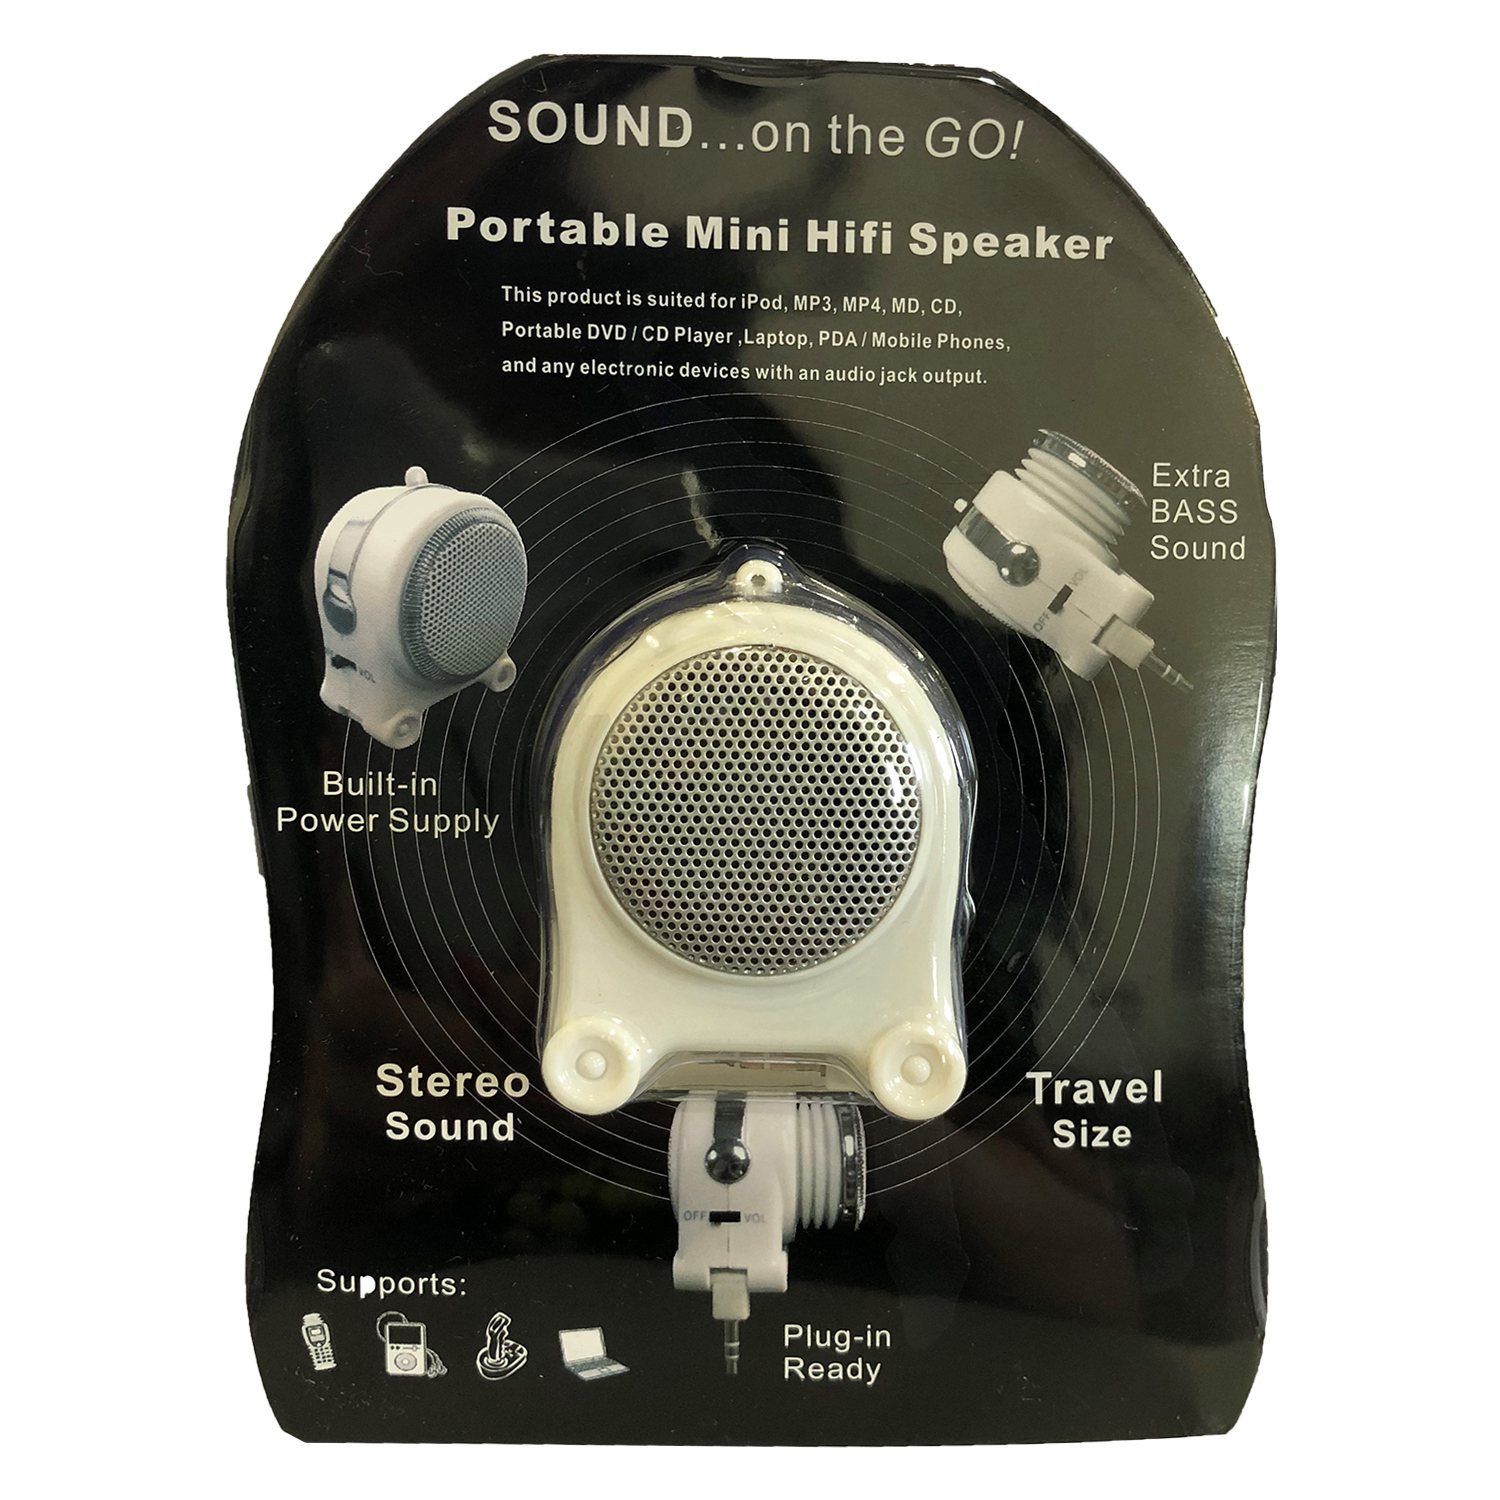 Pony Portable Mini Hifi Rechargeable Speaker with Extra Bass Sound MP3 Player - White - image 1 of 1